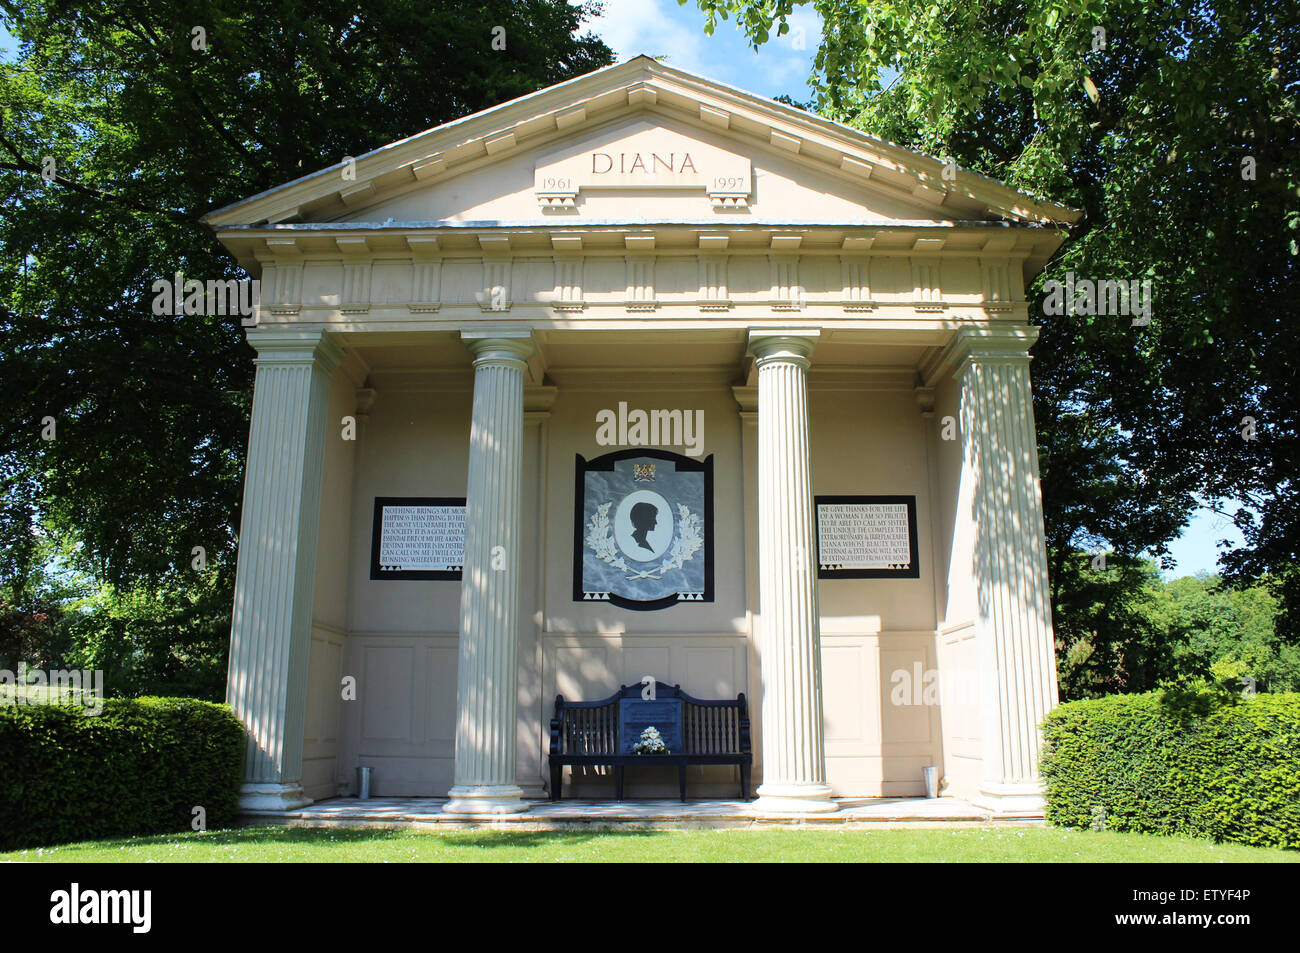 Temple in the grounds of the Althorp Estate dedicated to Diana ...